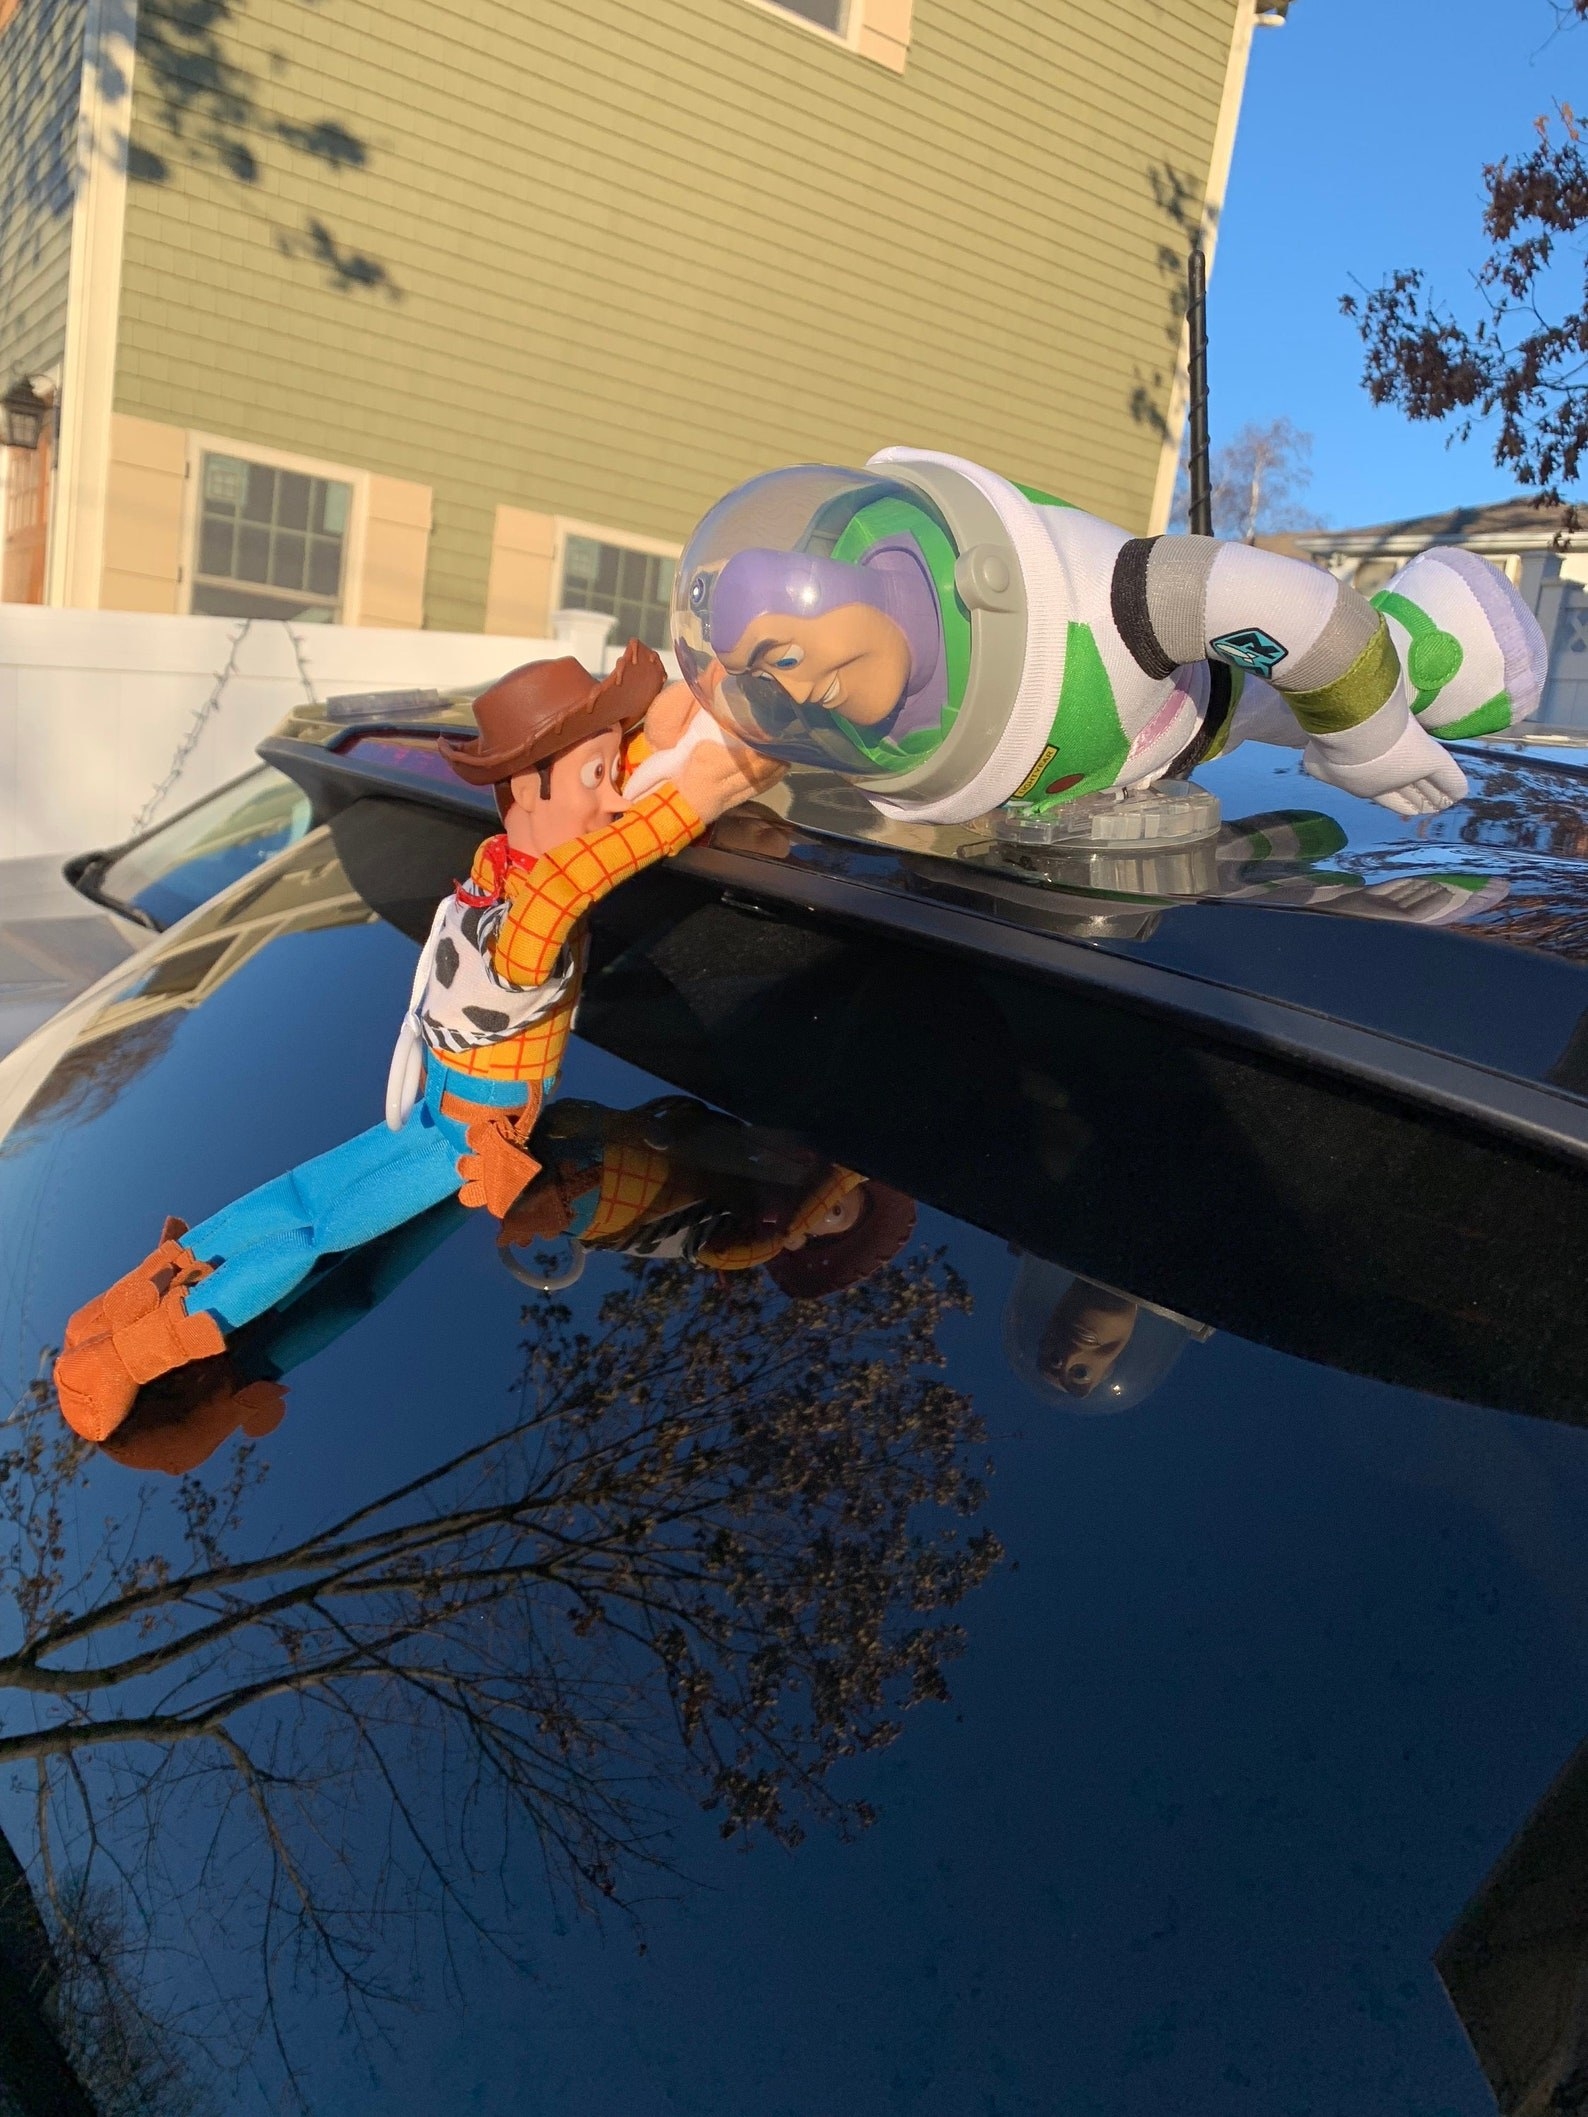 The ToyStory accessory of Buzz Lightyear saving Woody from dangling on the edge of a car